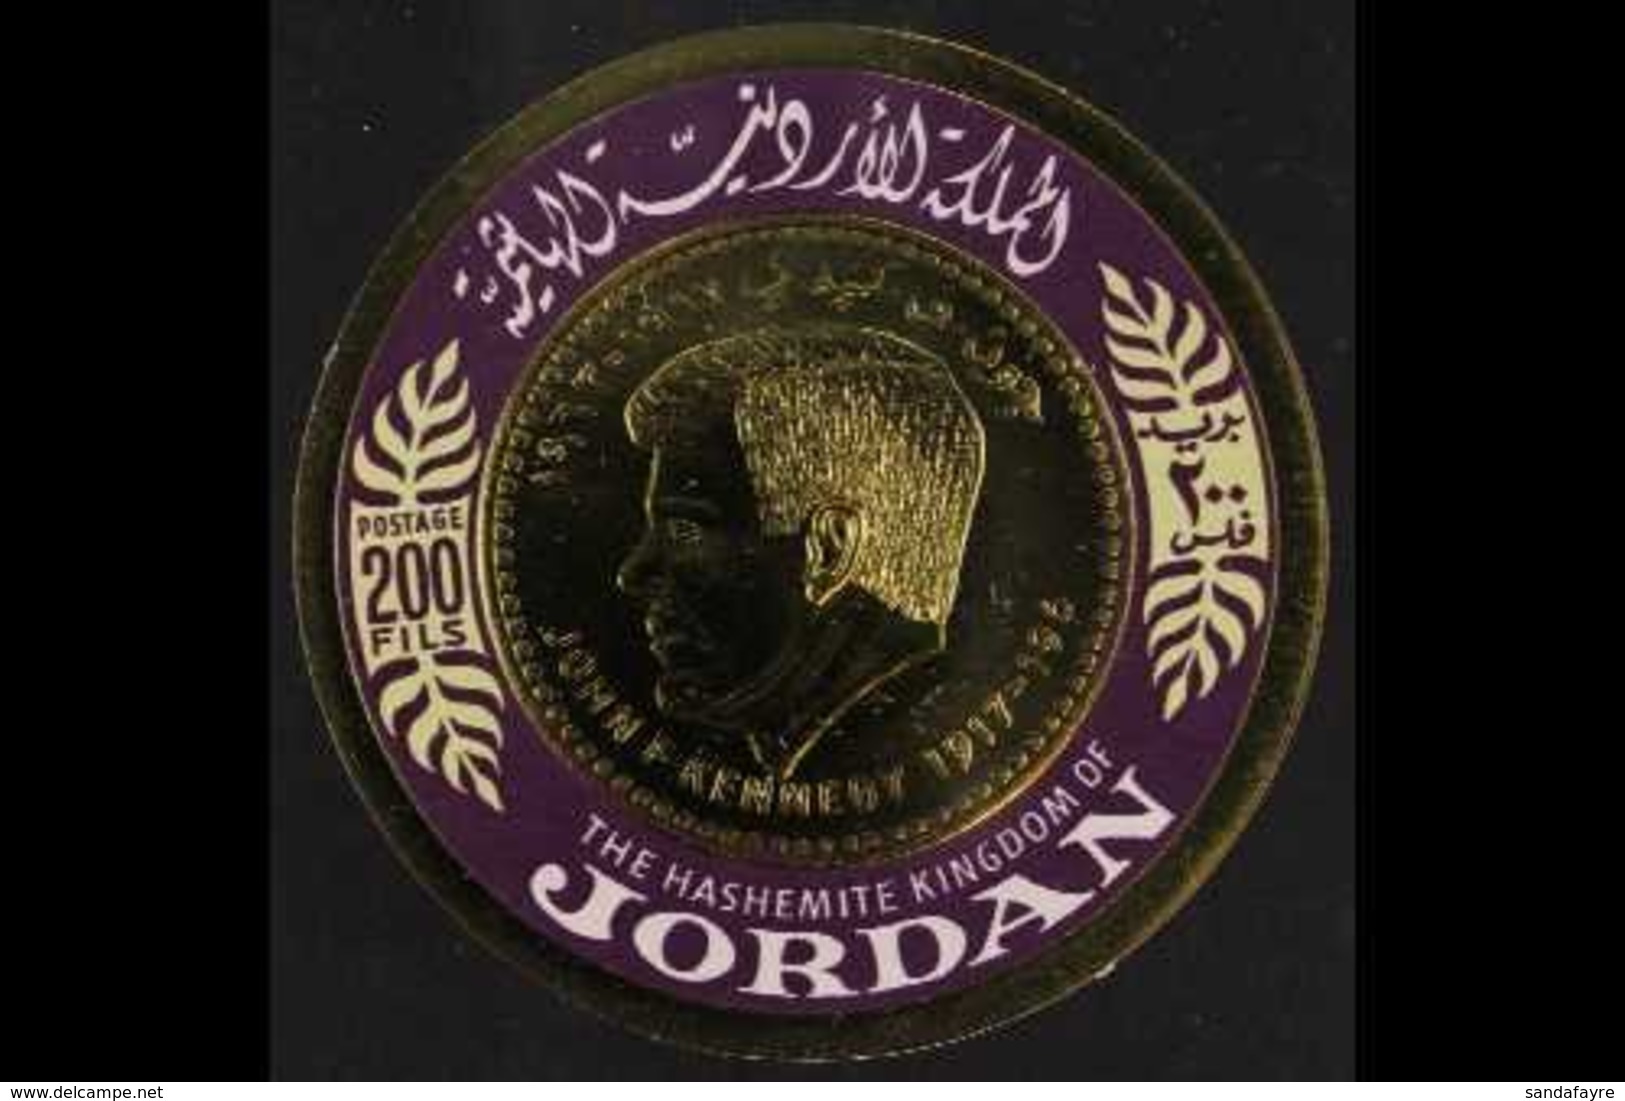 1967 GOLD COIN VARIETY 200f Purple & Bright Yellow Green (as SG 796e) "MISSING 6 VARIETY", Reads JOHN F. KENNEDY 1917-19 - Giordania